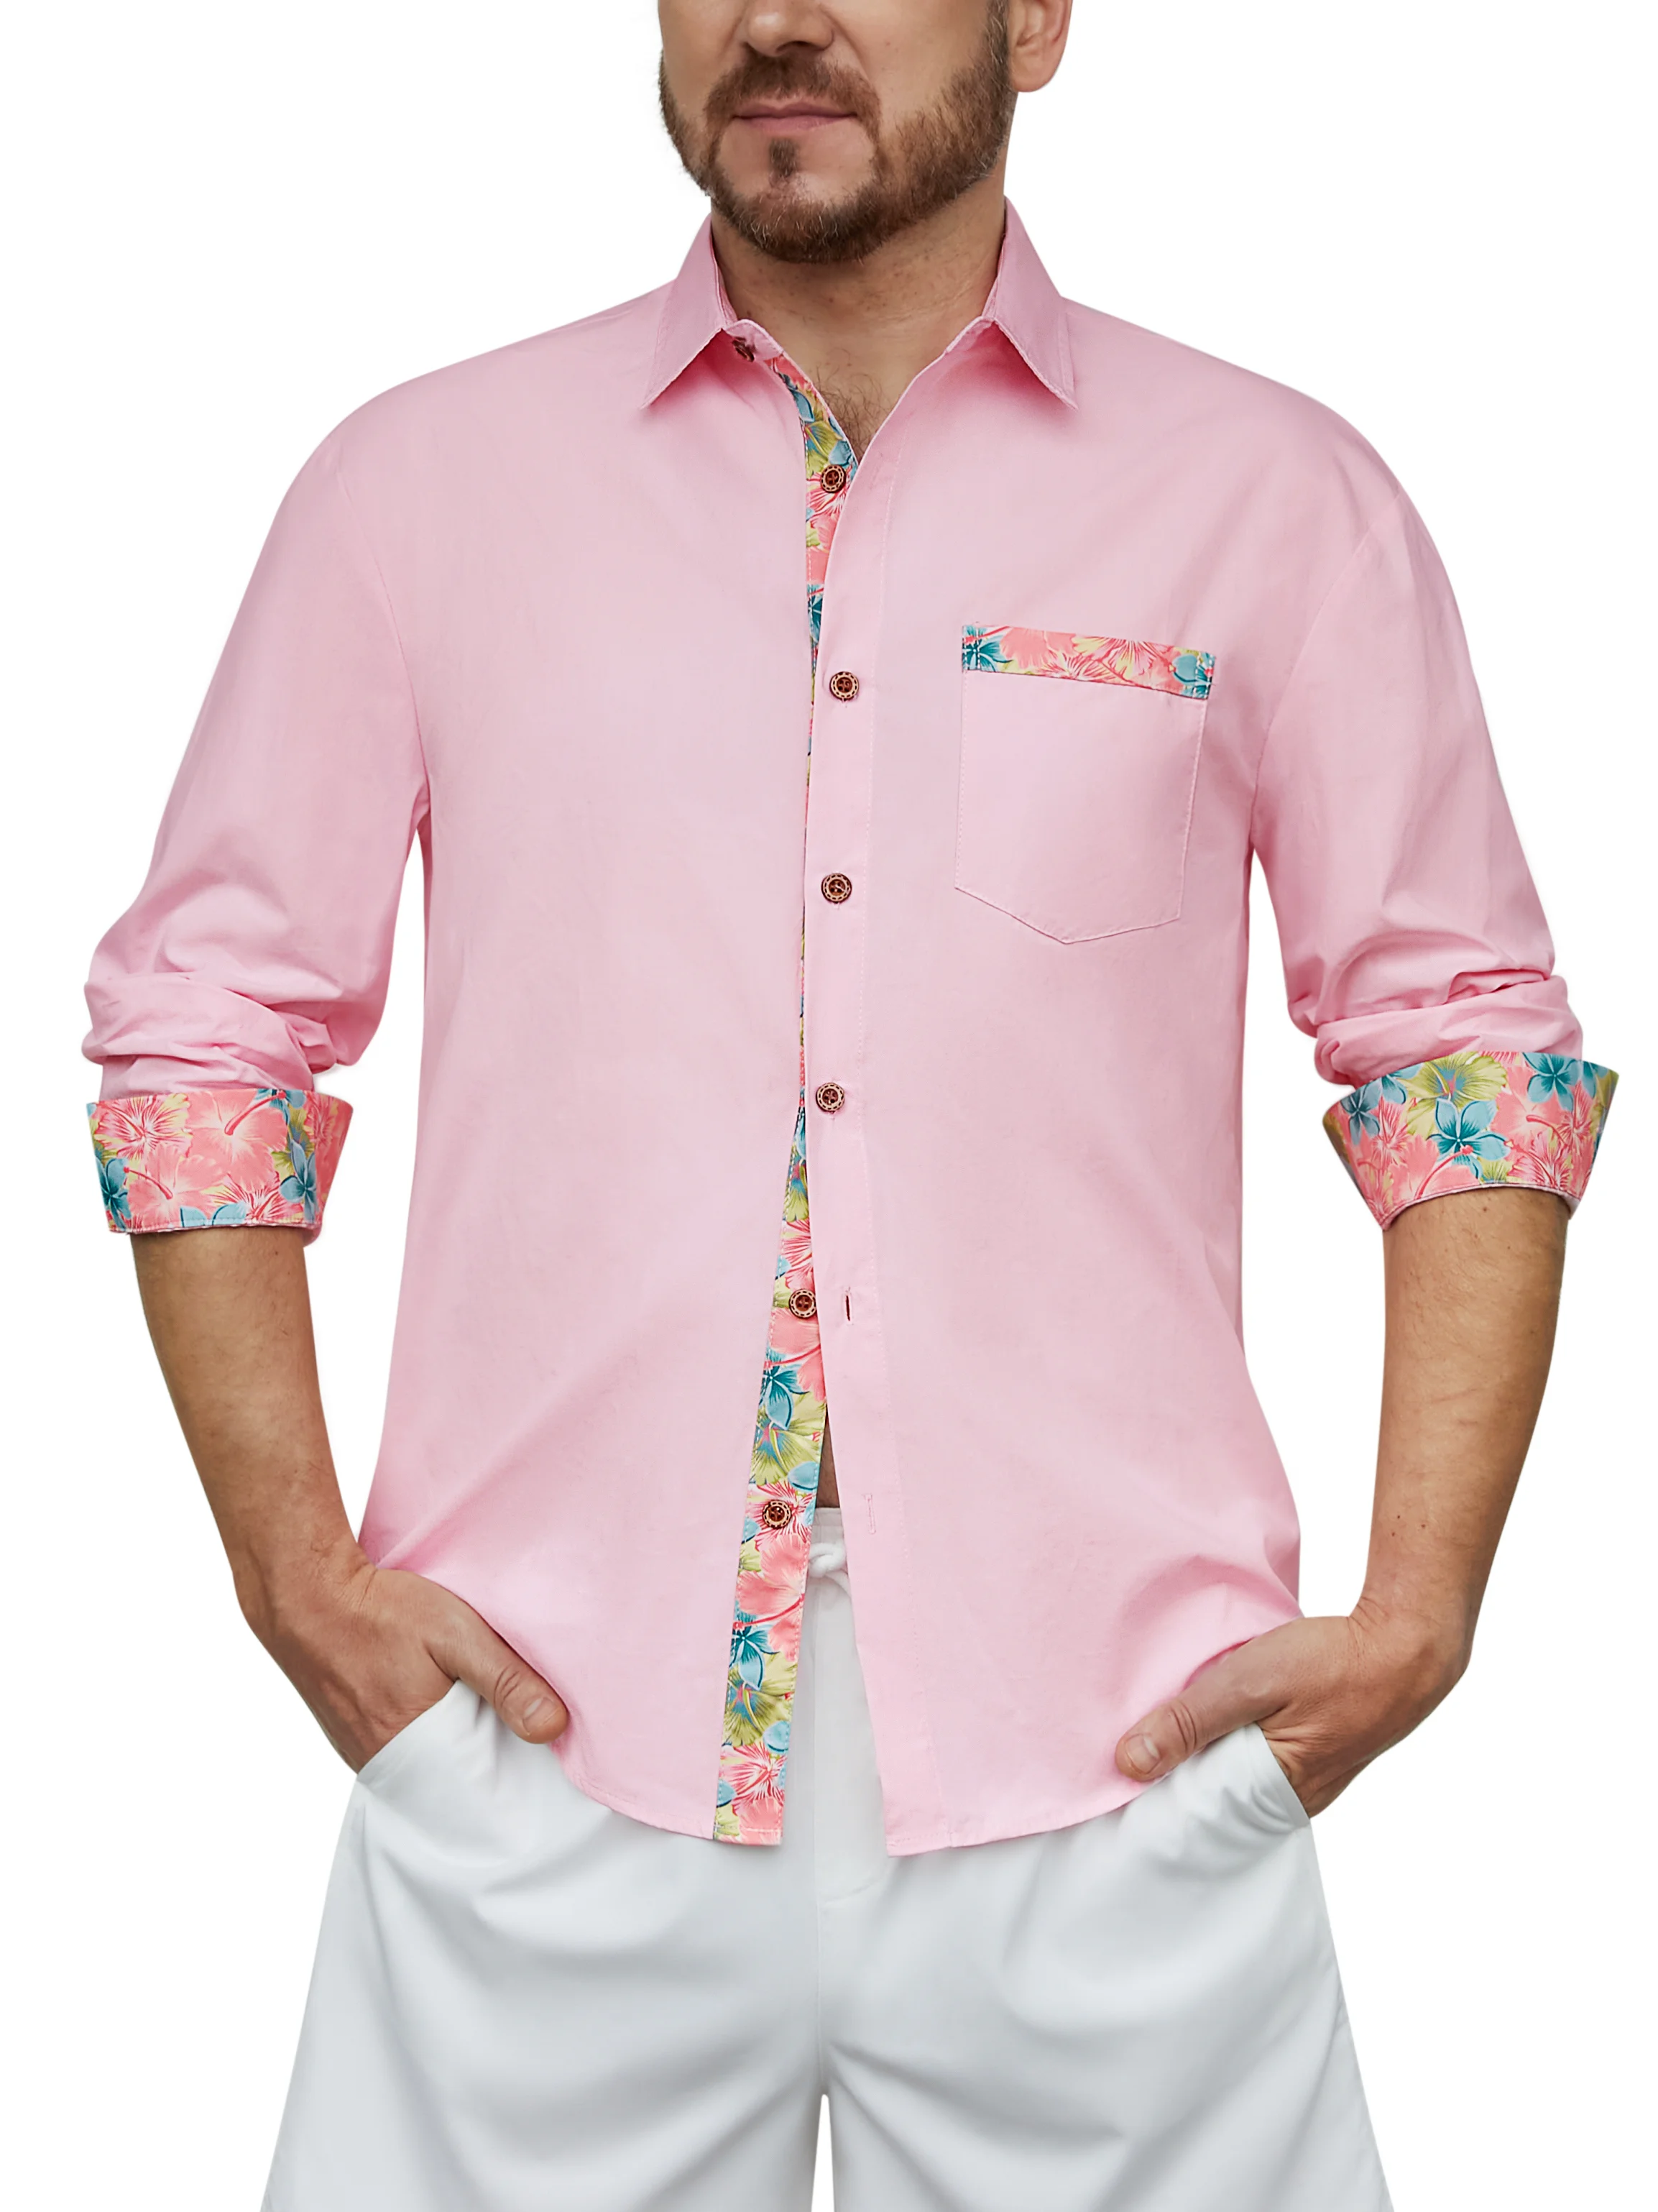 Hardaddy Cotton Paneling Floral Chest Pocket Long Sleeve Shirt